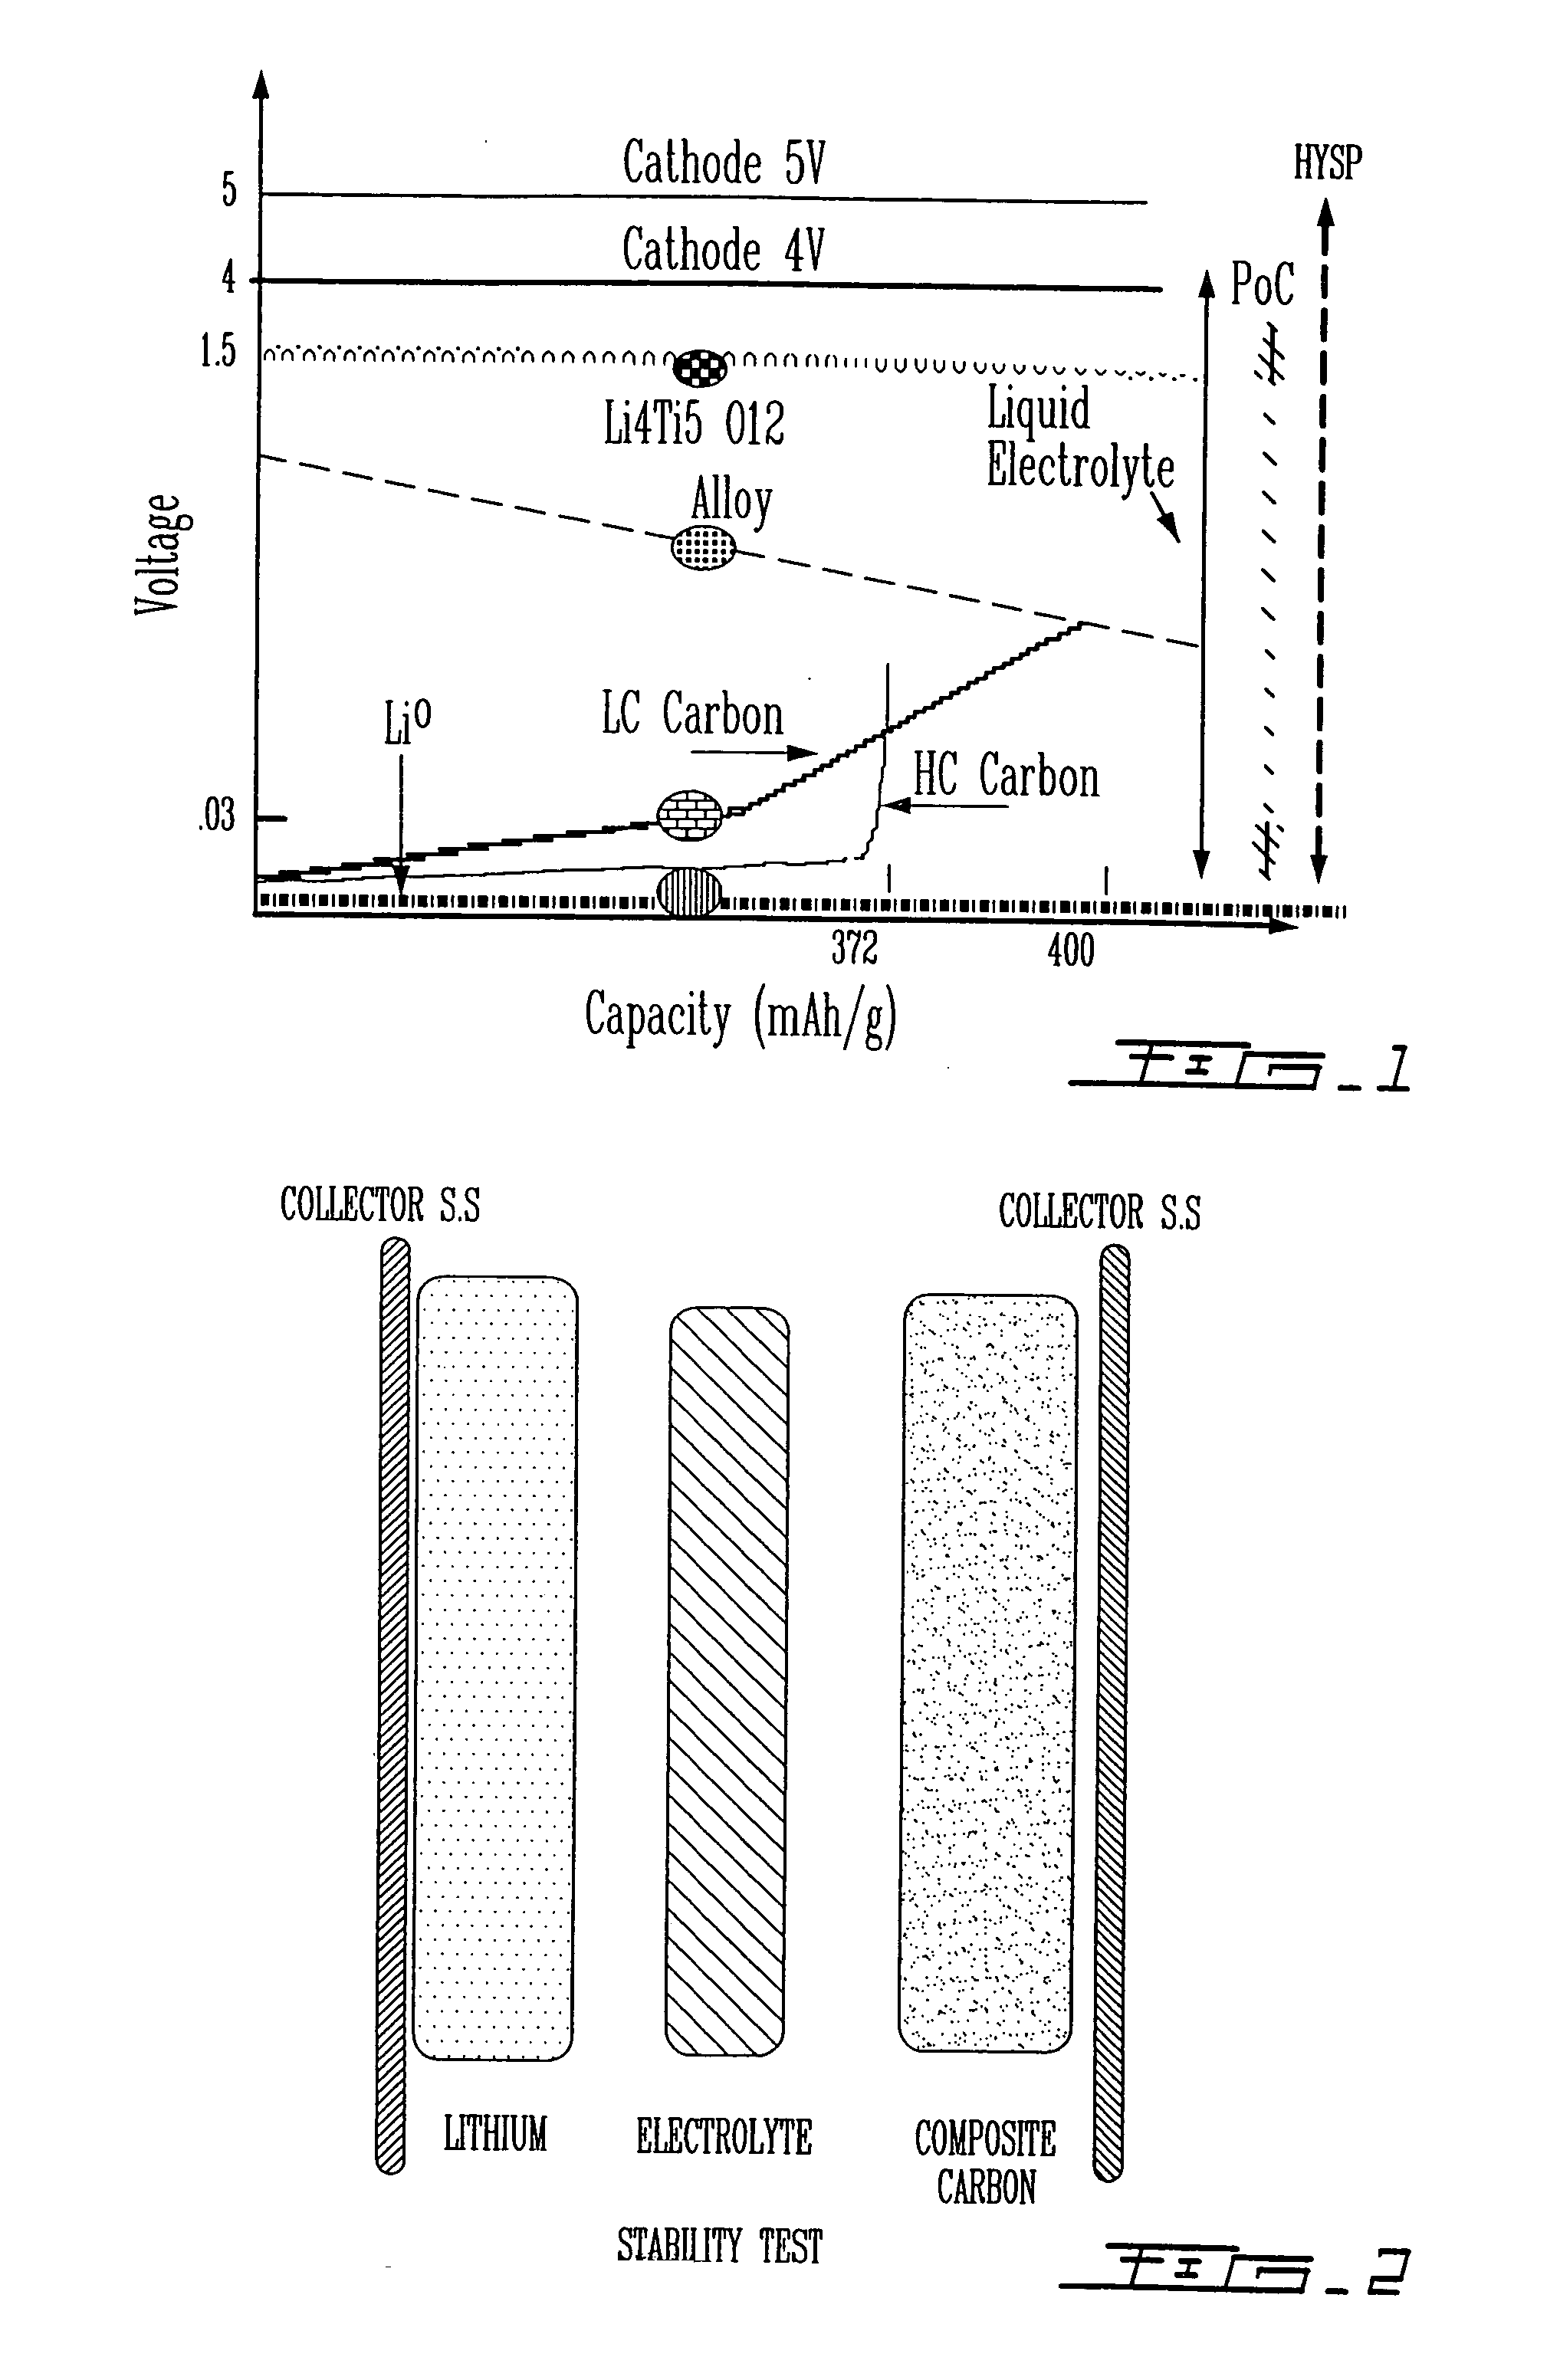 Highly-stable polymeric electrolyte and use thereof in electrochemical systems